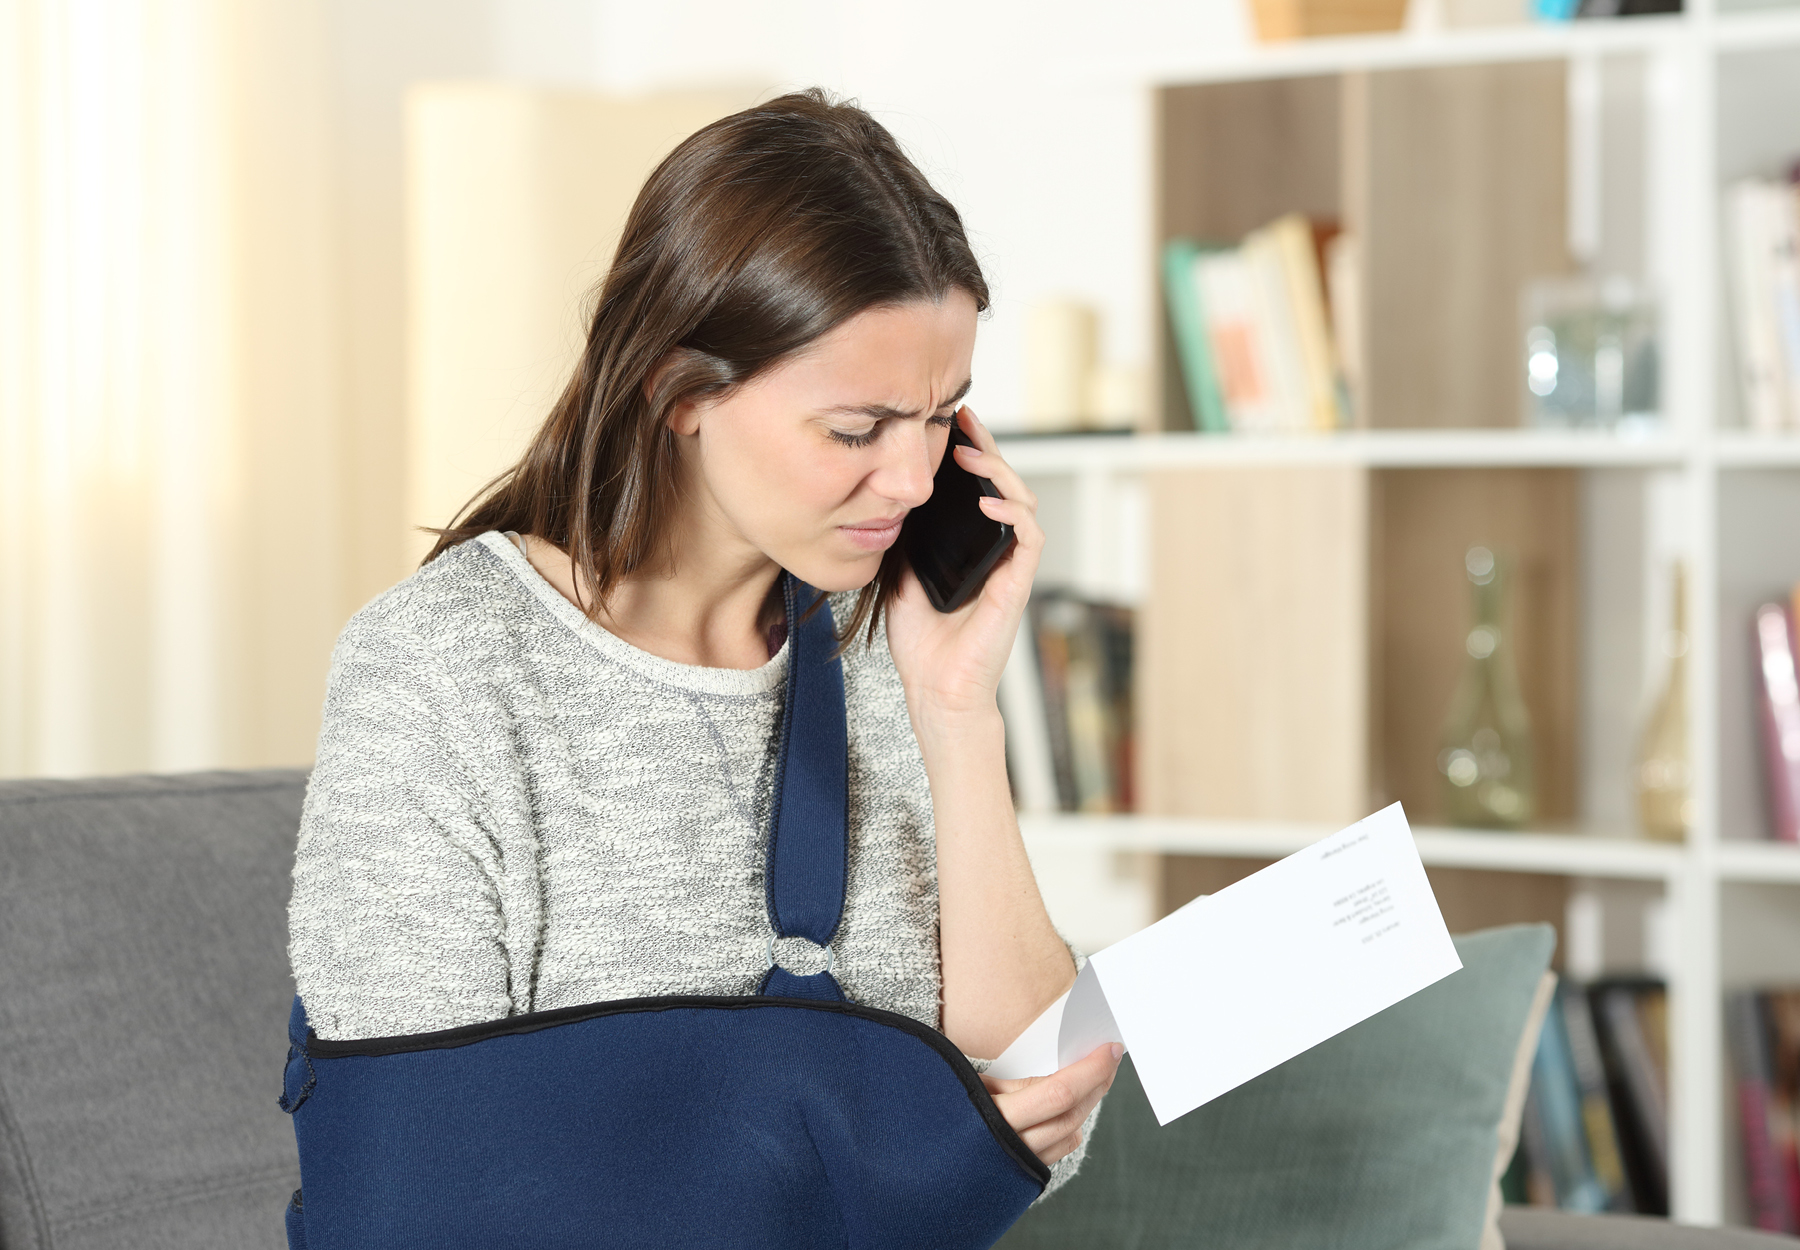 Woman with broken arm on the phone while holding a paper medical bill. Surprise medical bill concept. Stock image.